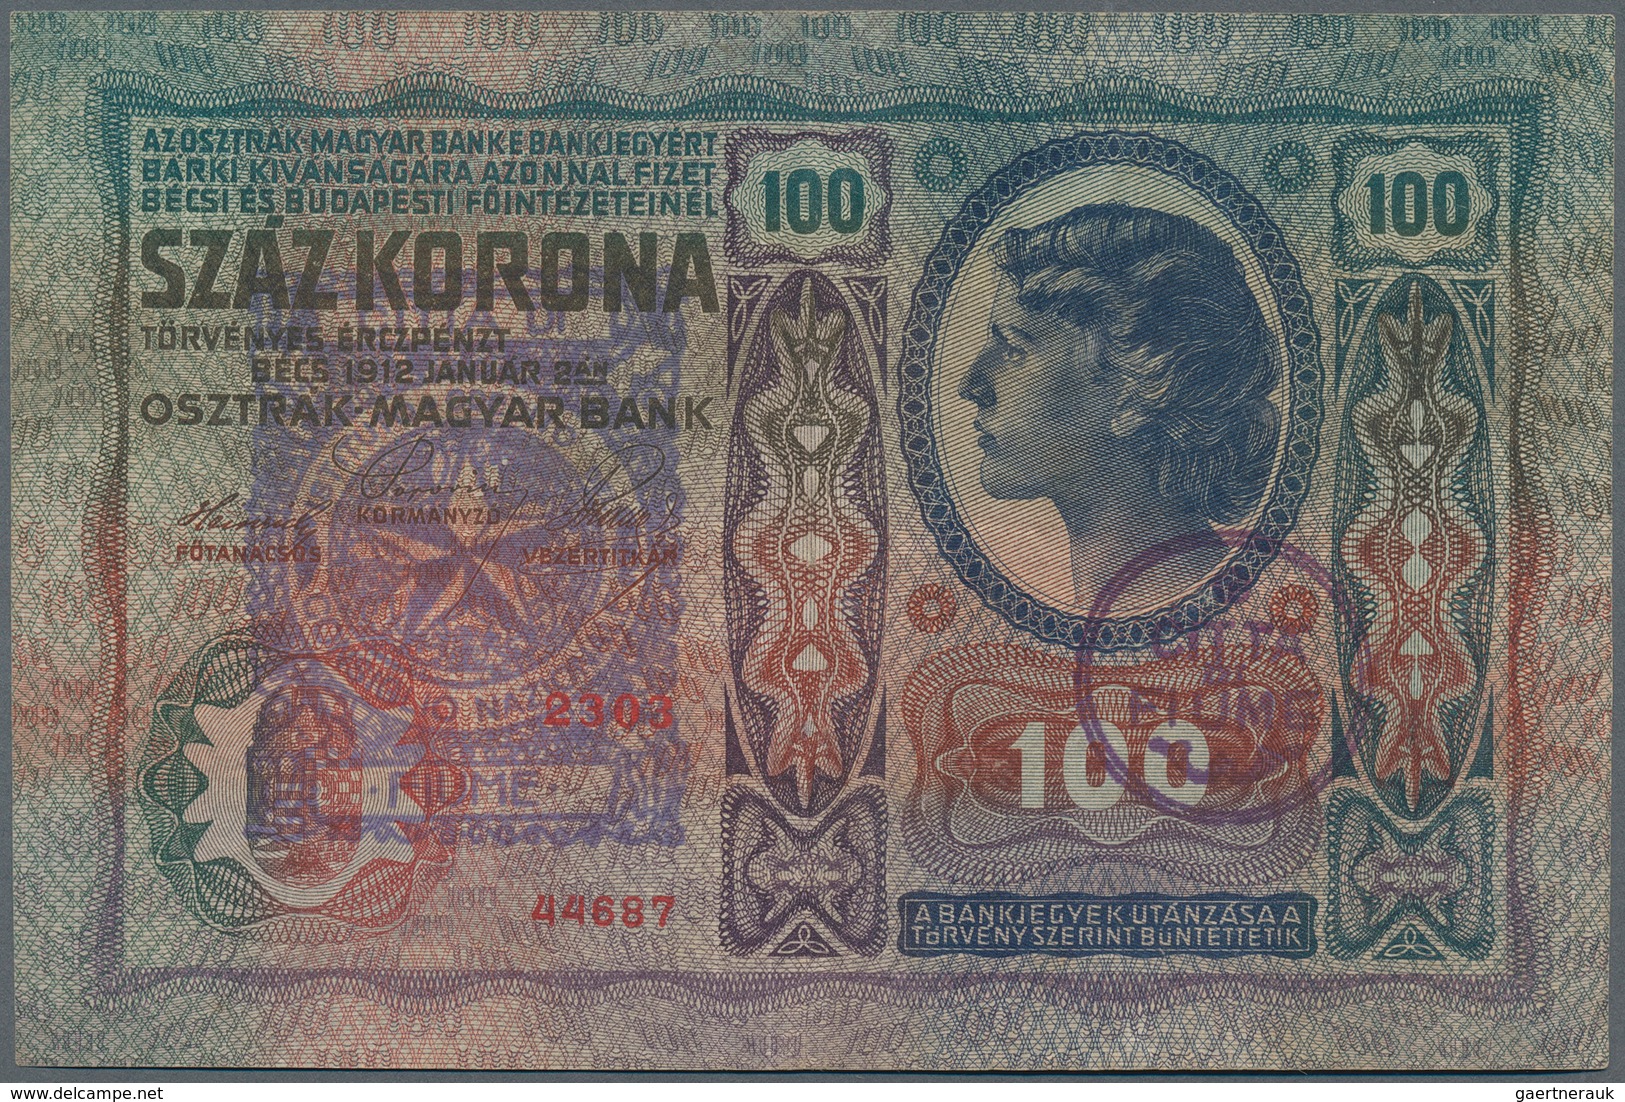 01086 Austria / Österreich: FIUME 100 Korona 1912 P. S115d Withh Large Stamp Ovpt. At Left And Additional - Oostenrijk